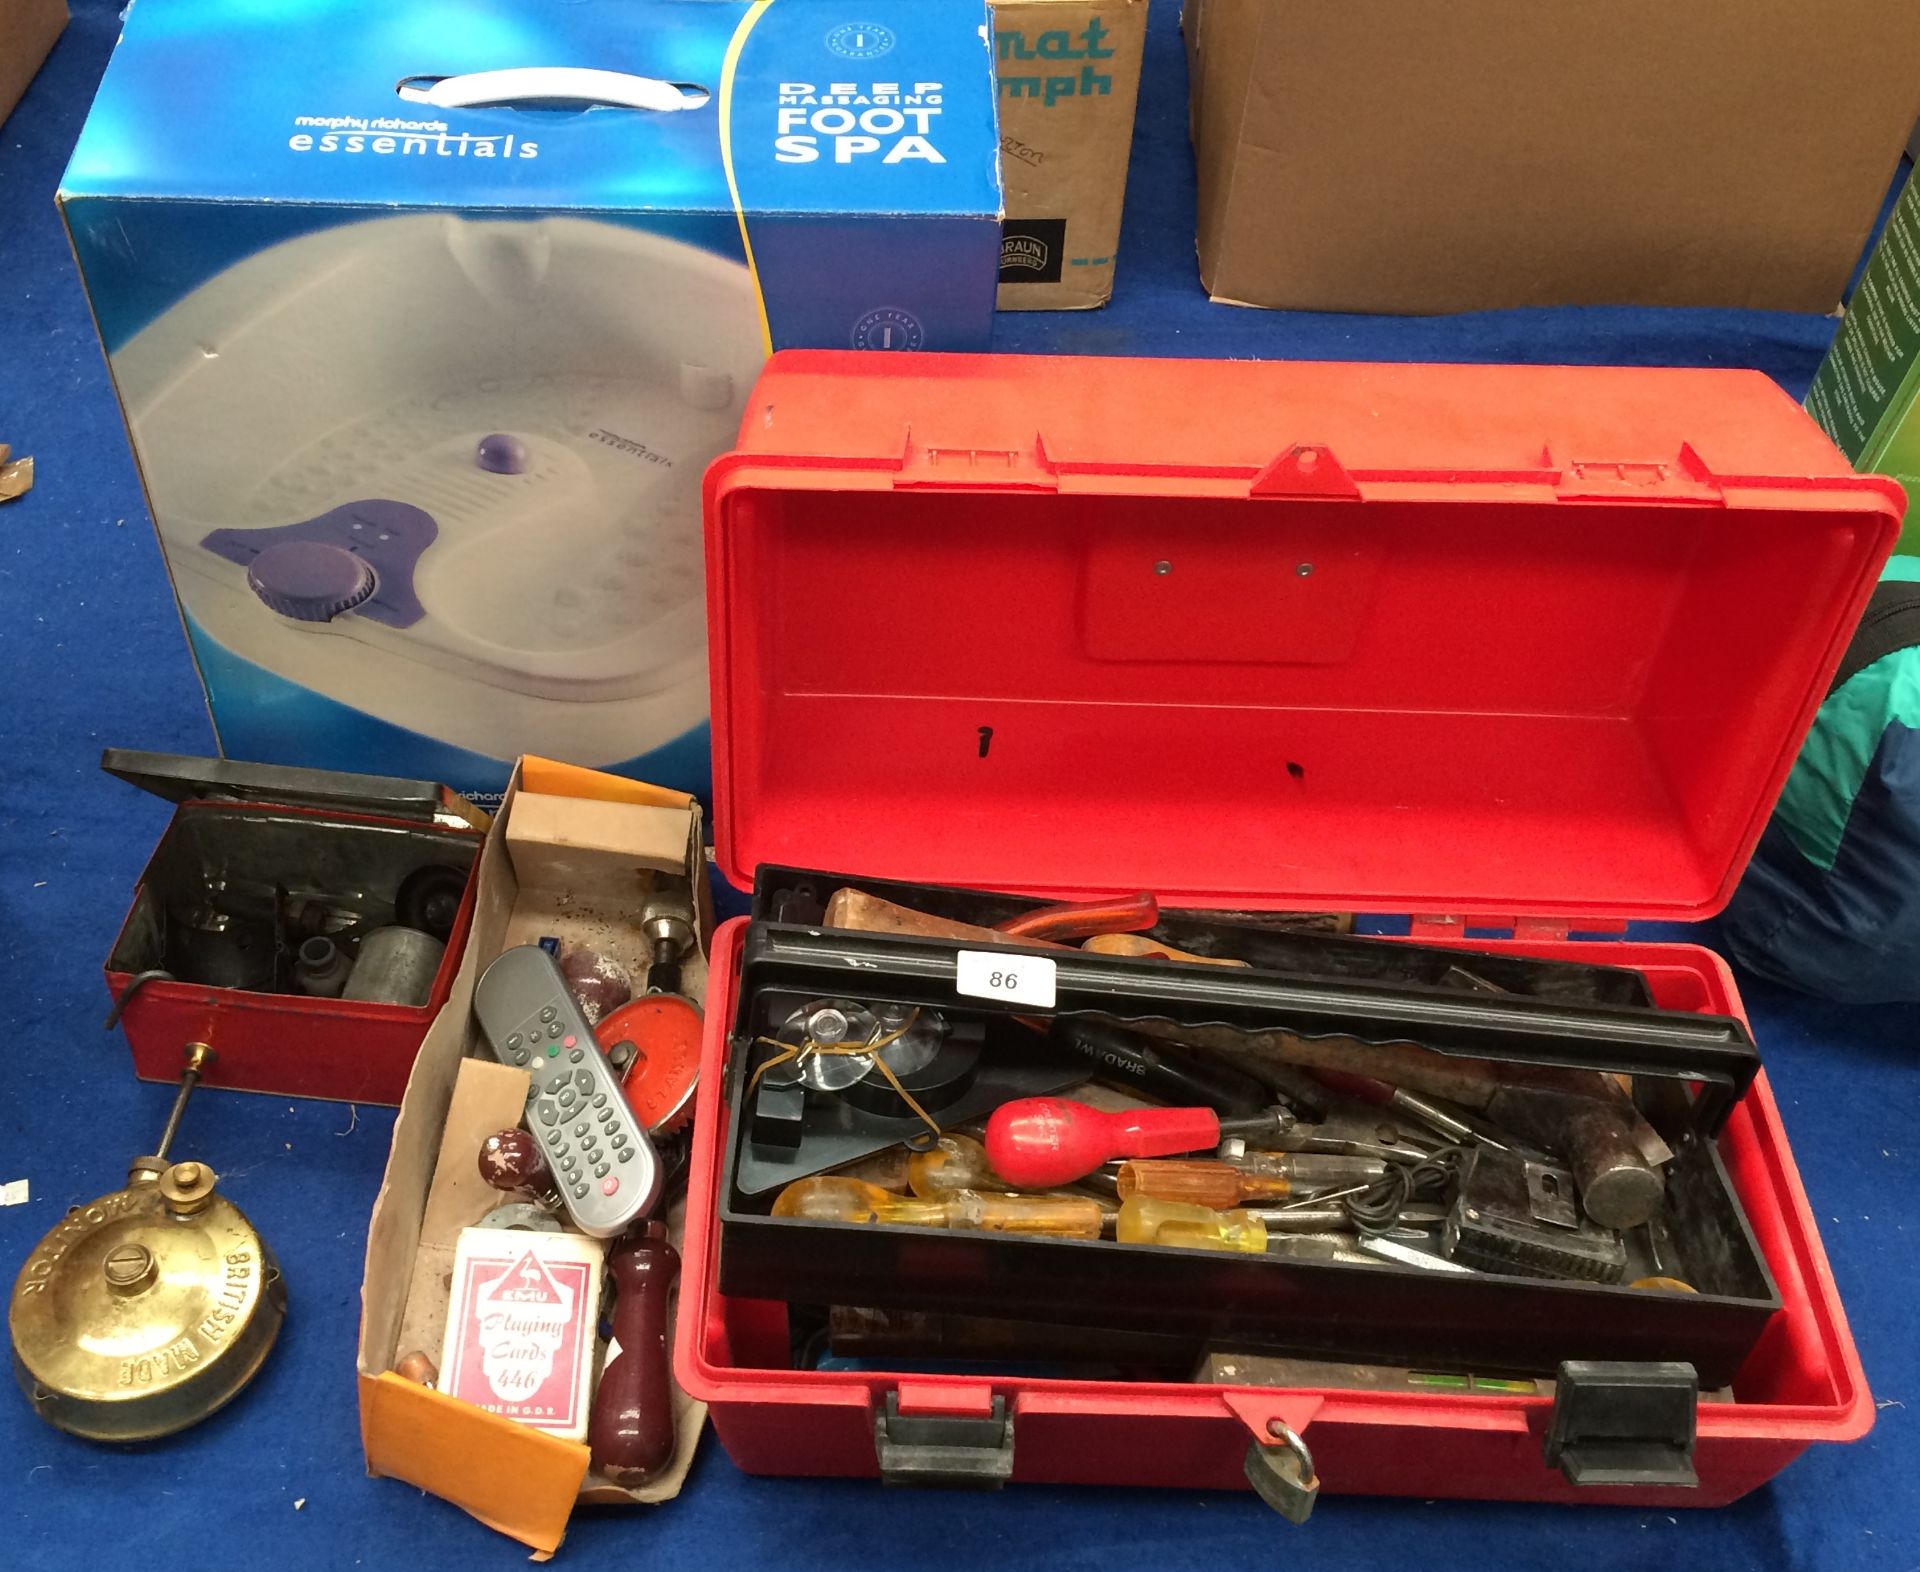 Plastic toolbox and contents - hammers. screwdrivers, spanners, sockets, etc.